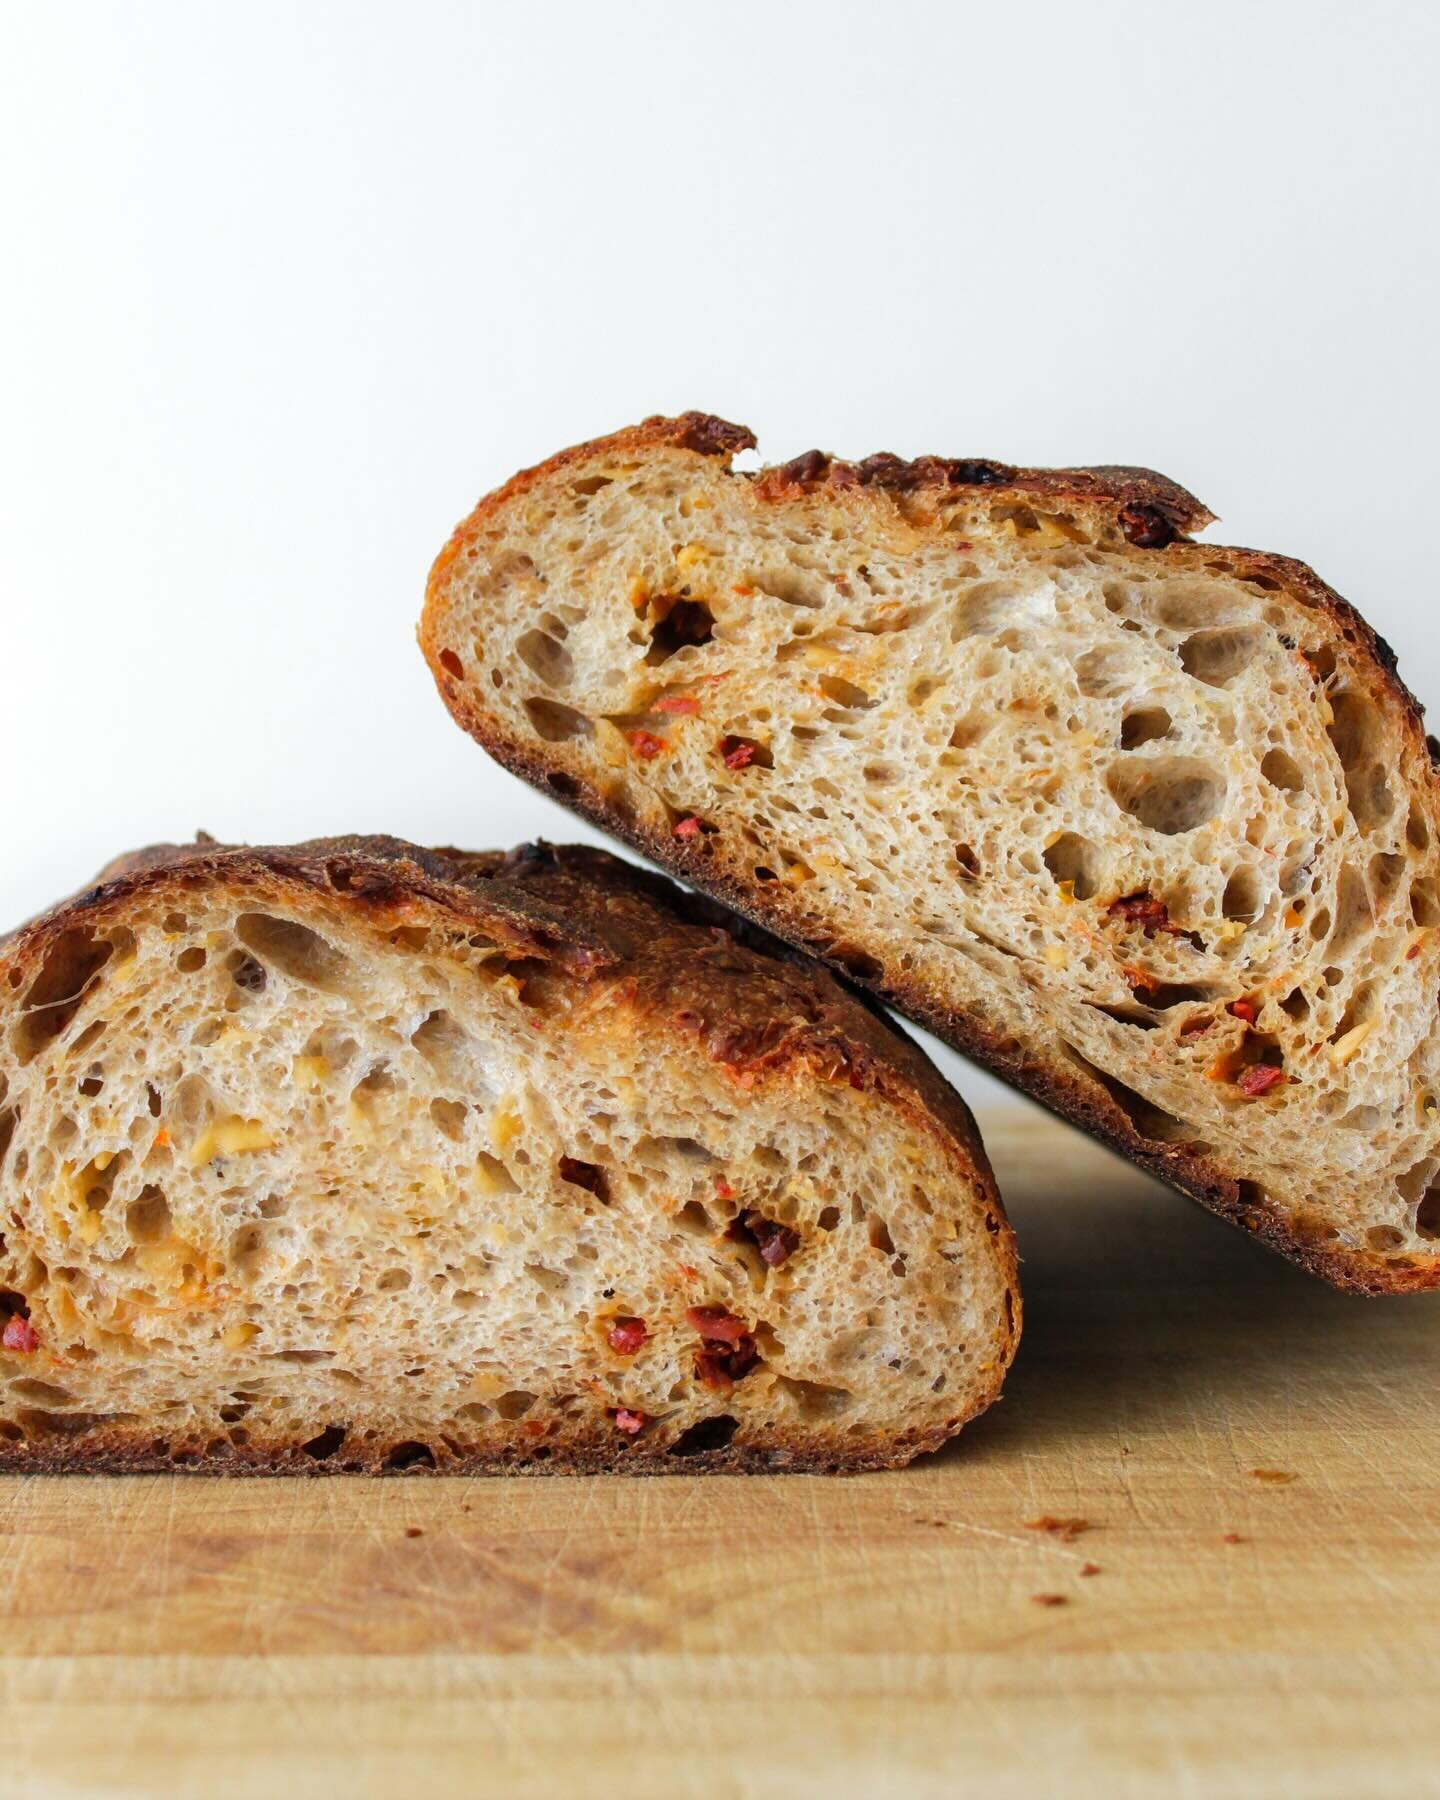 New Smoked Gouda and Sun-Dried Tomato Sourdough loaf. Available both this Saturday and Monday!